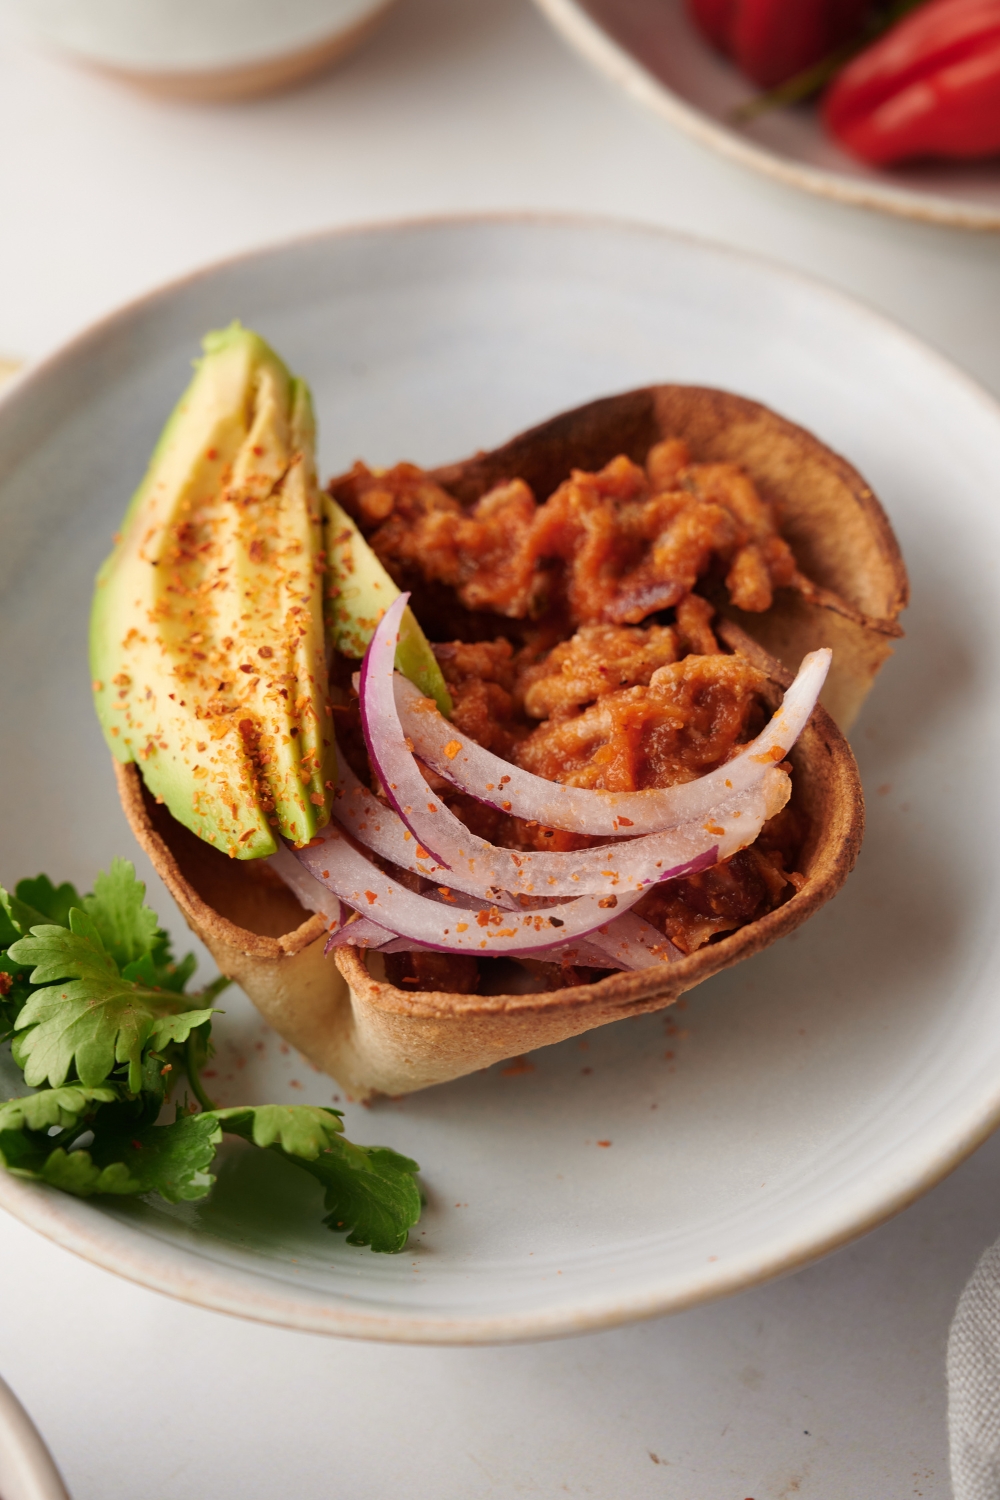 Cooked Mexican chili served in a tortilla bowl with avocado